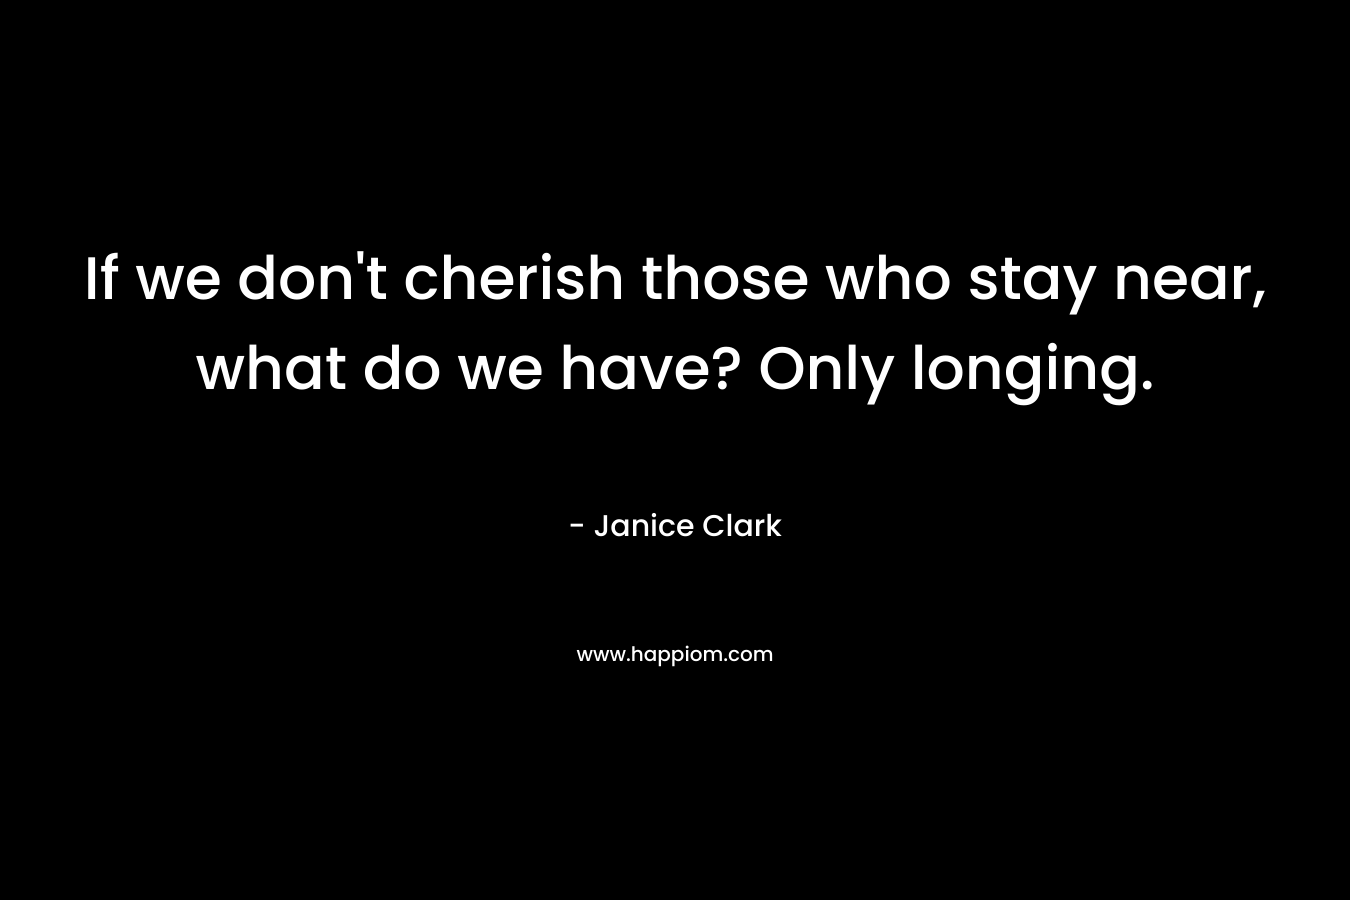 If we don't cherish those who stay near, what do we have? Only longing.